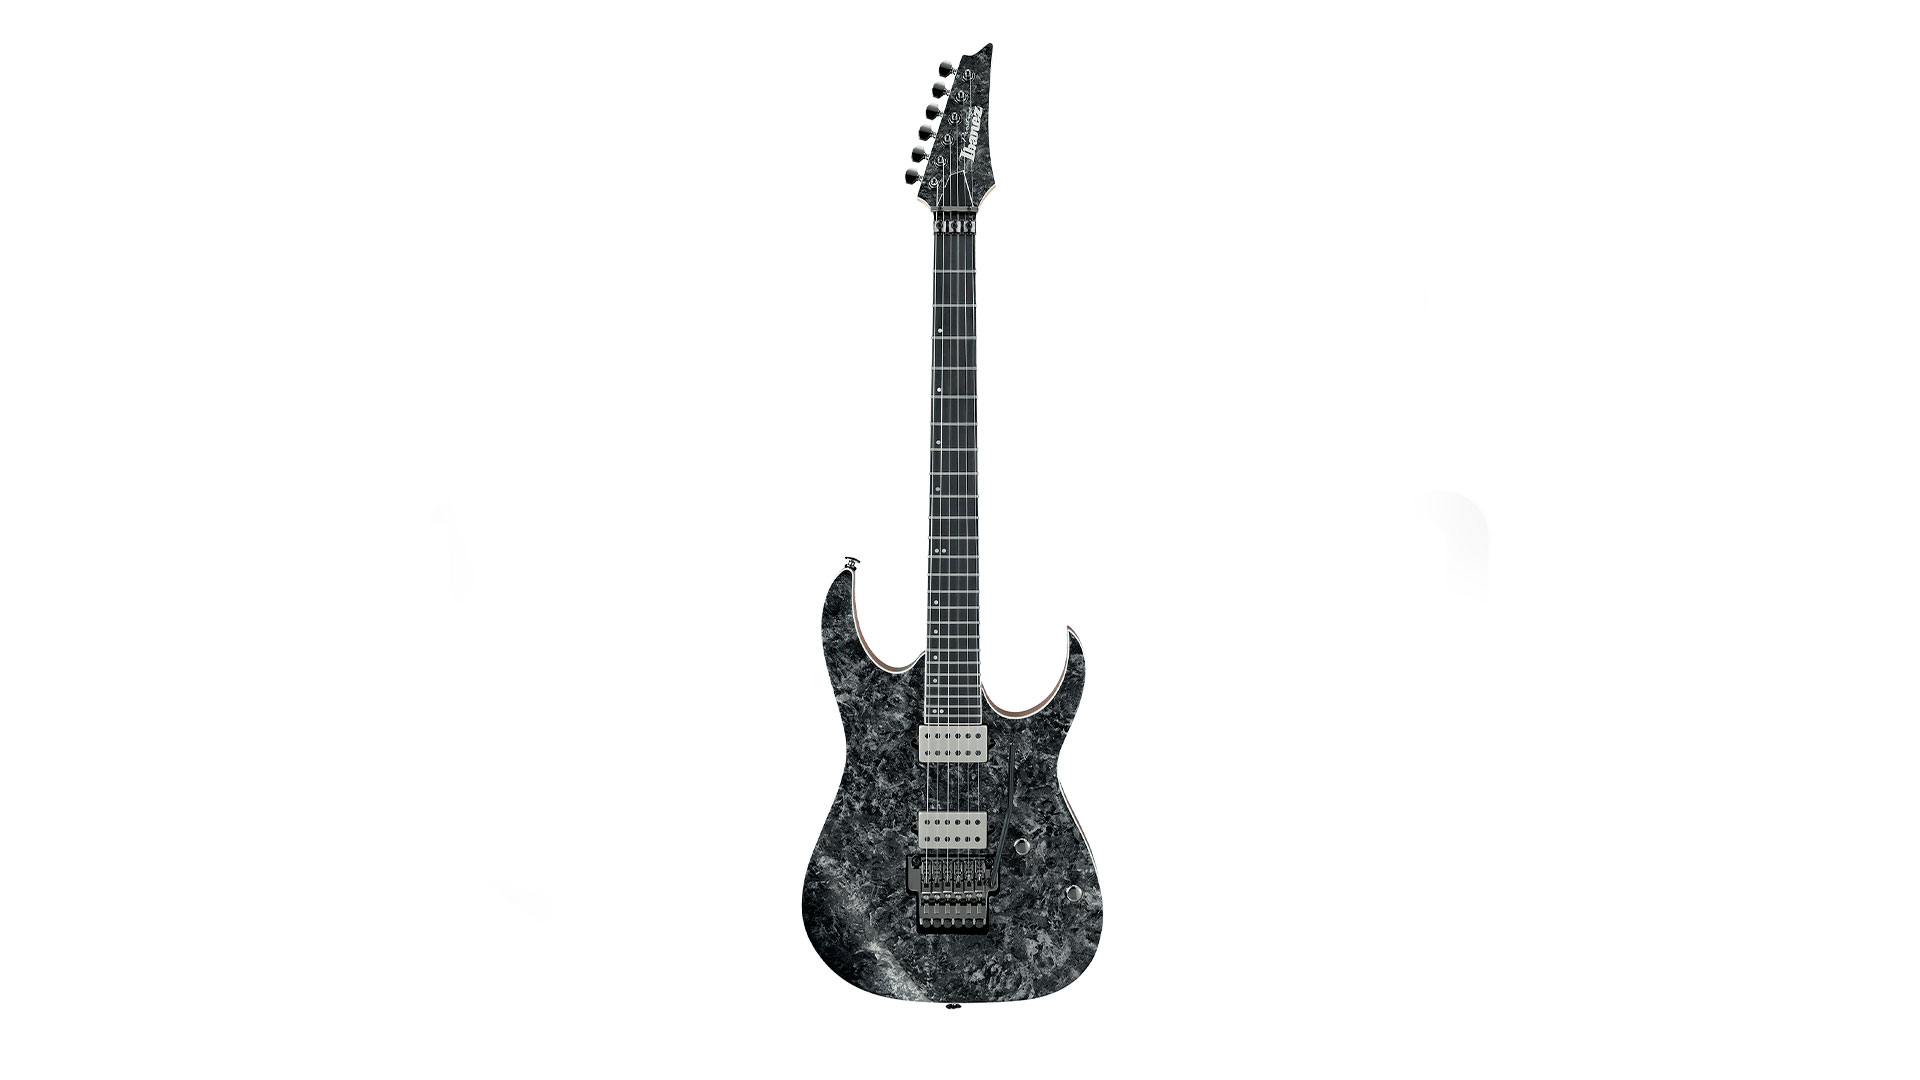 Top Lefthanded Guitars